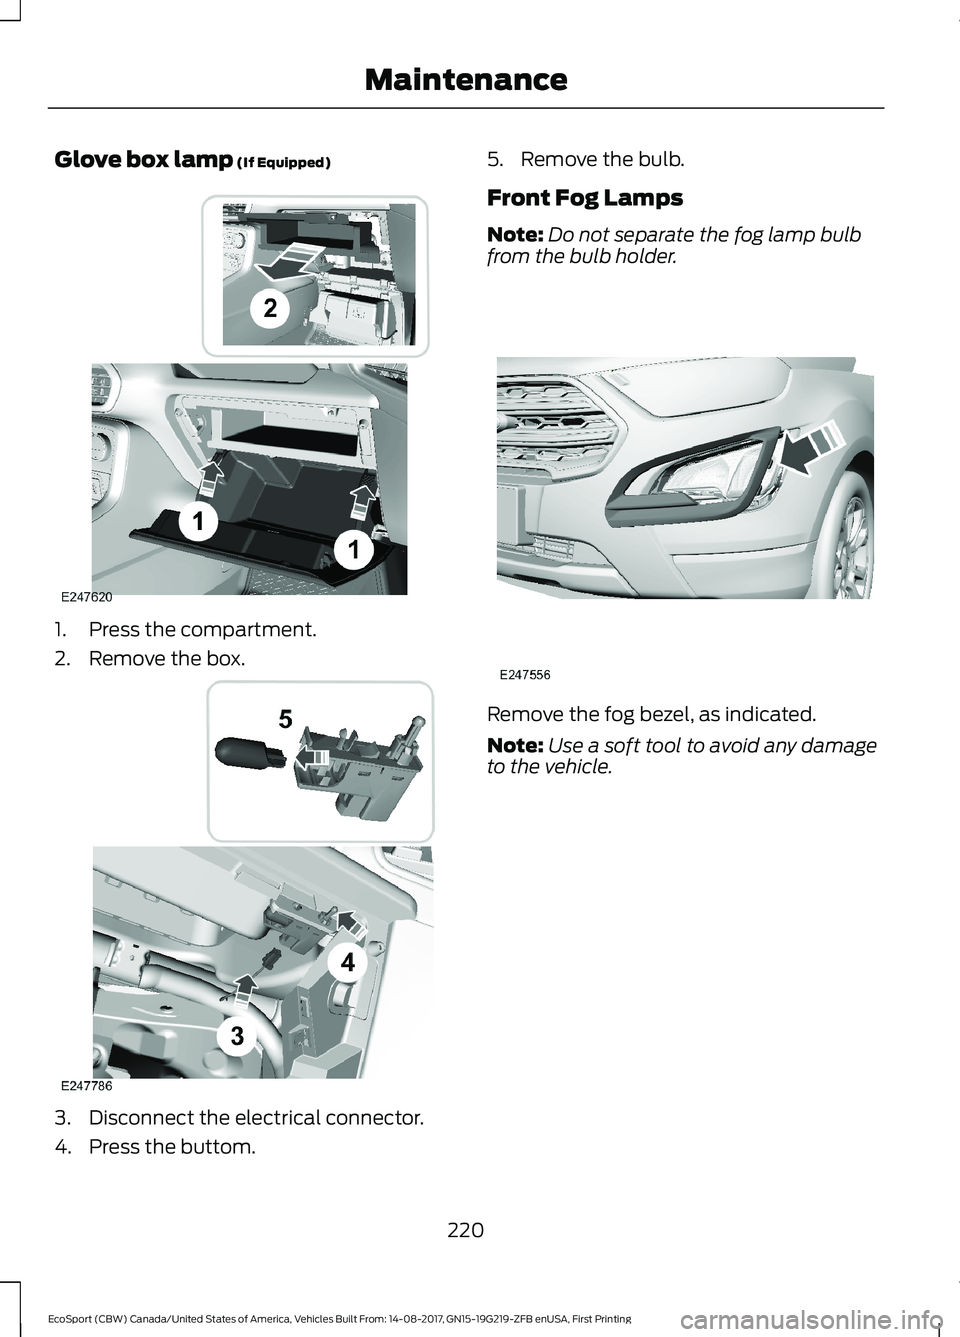 FORD ECOSPORT 2018  Owners Manual Glove box lamp (If Equipped)
1.Press the compartment.
2.Remove the box.
3.Disconnect the electrical connector.
4.Press the buttom.
5.Remove the bulb.
Front Fog Lamps
Note:Do not separate the fog lamp 